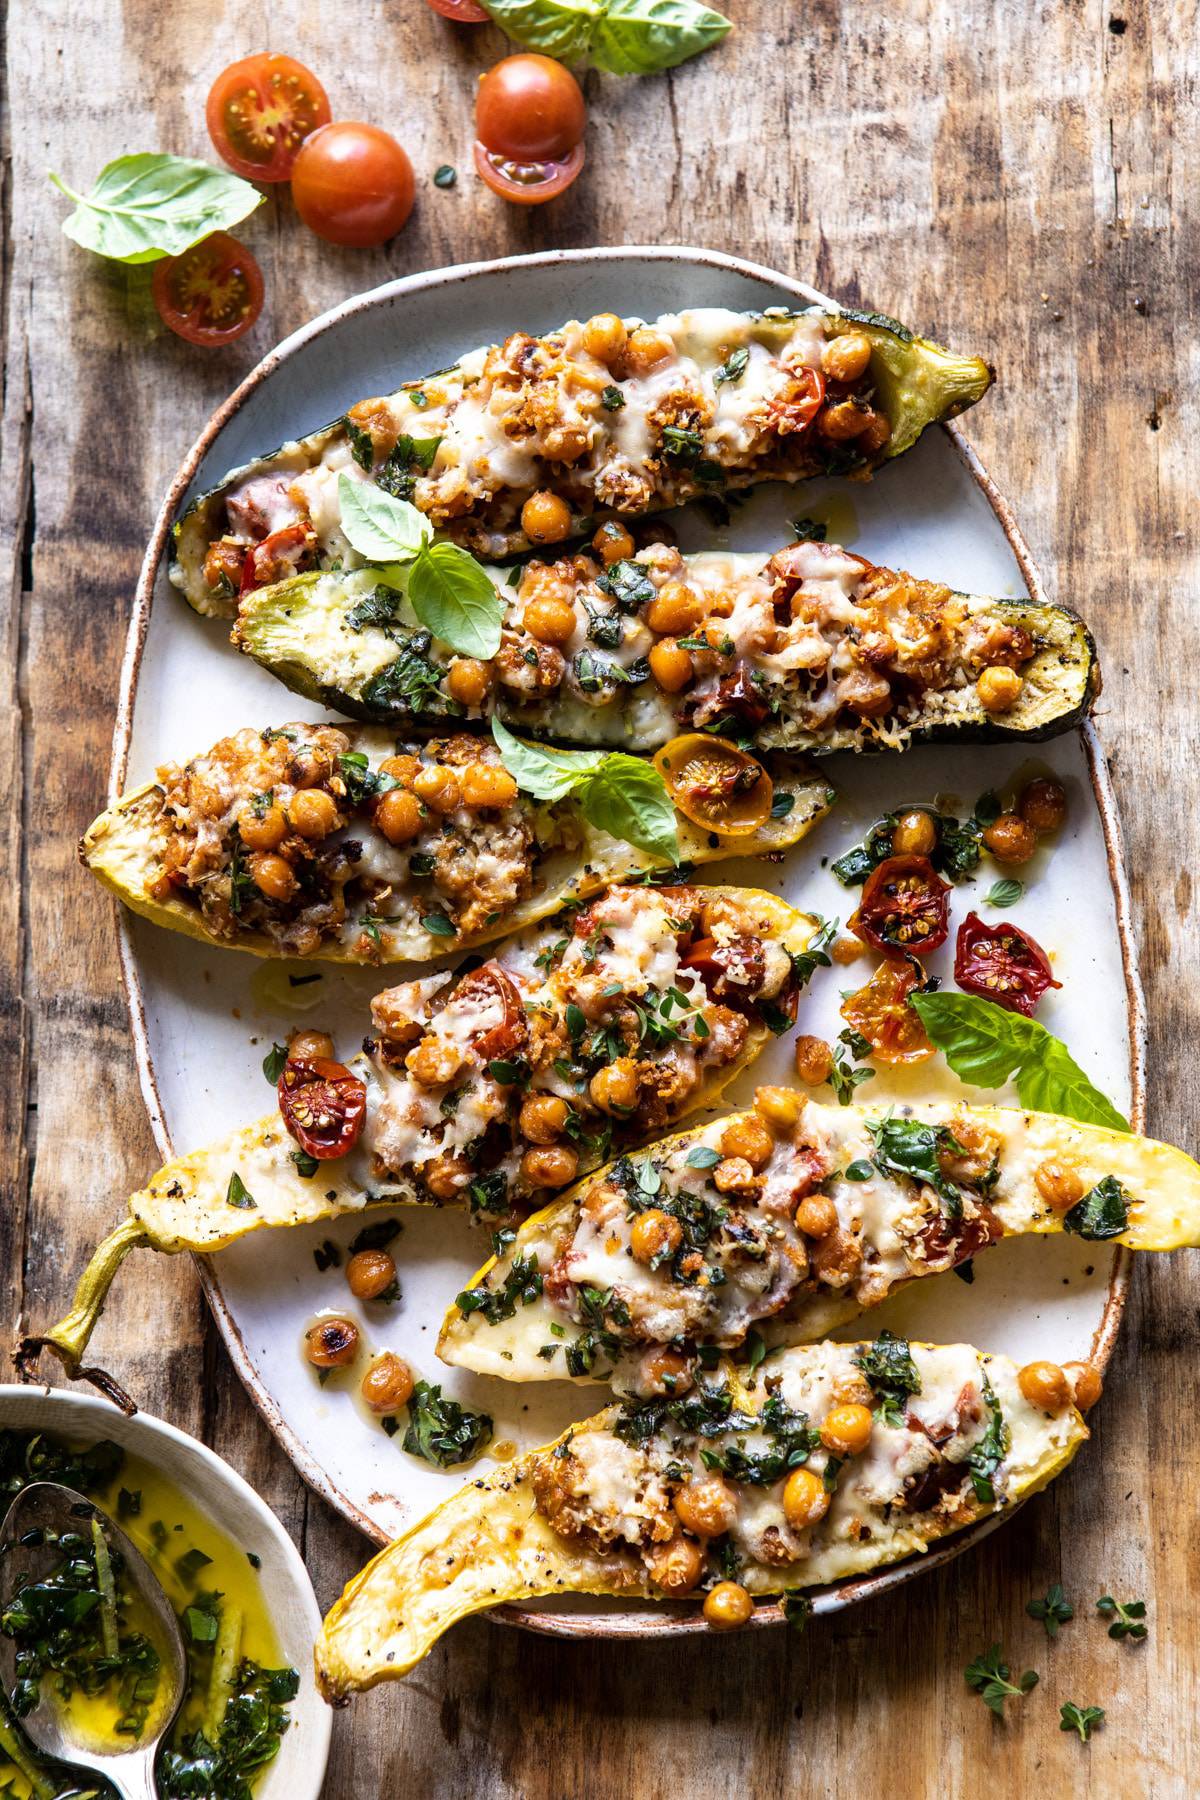 Spicy Chickpea and Cheese Stuffed Zucchini. - Half Baked Harvest